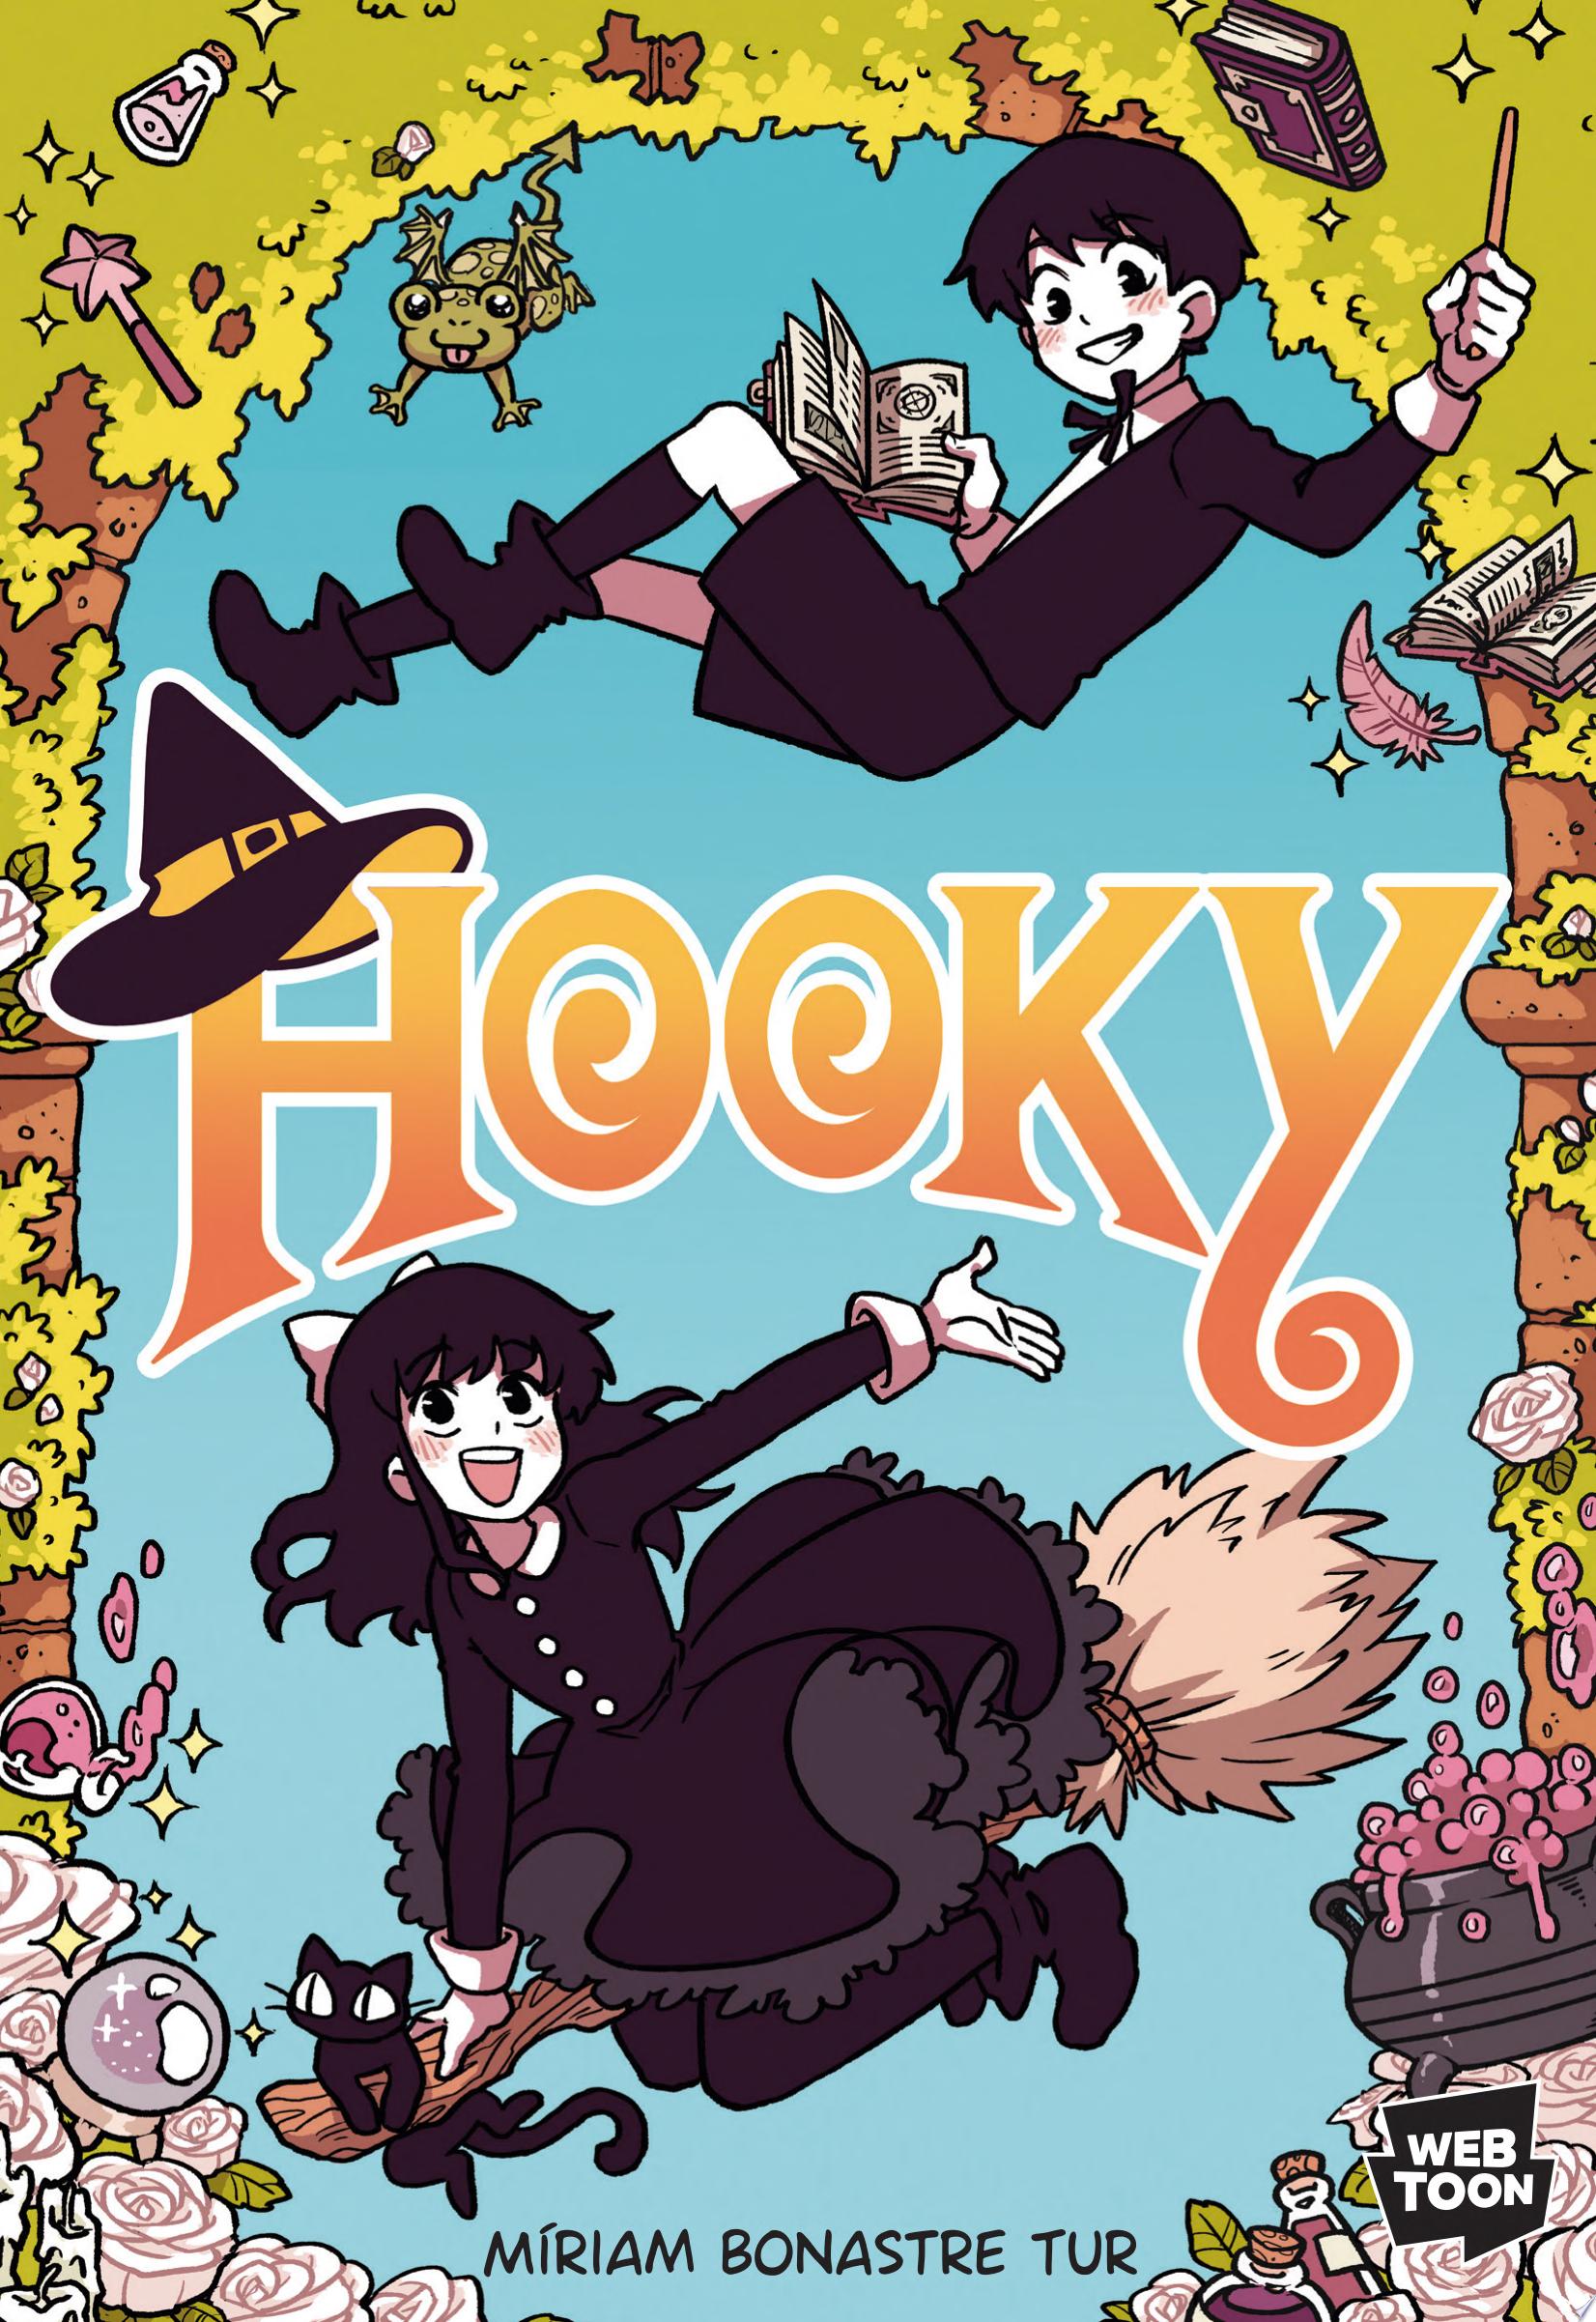 Image for "Hooky"